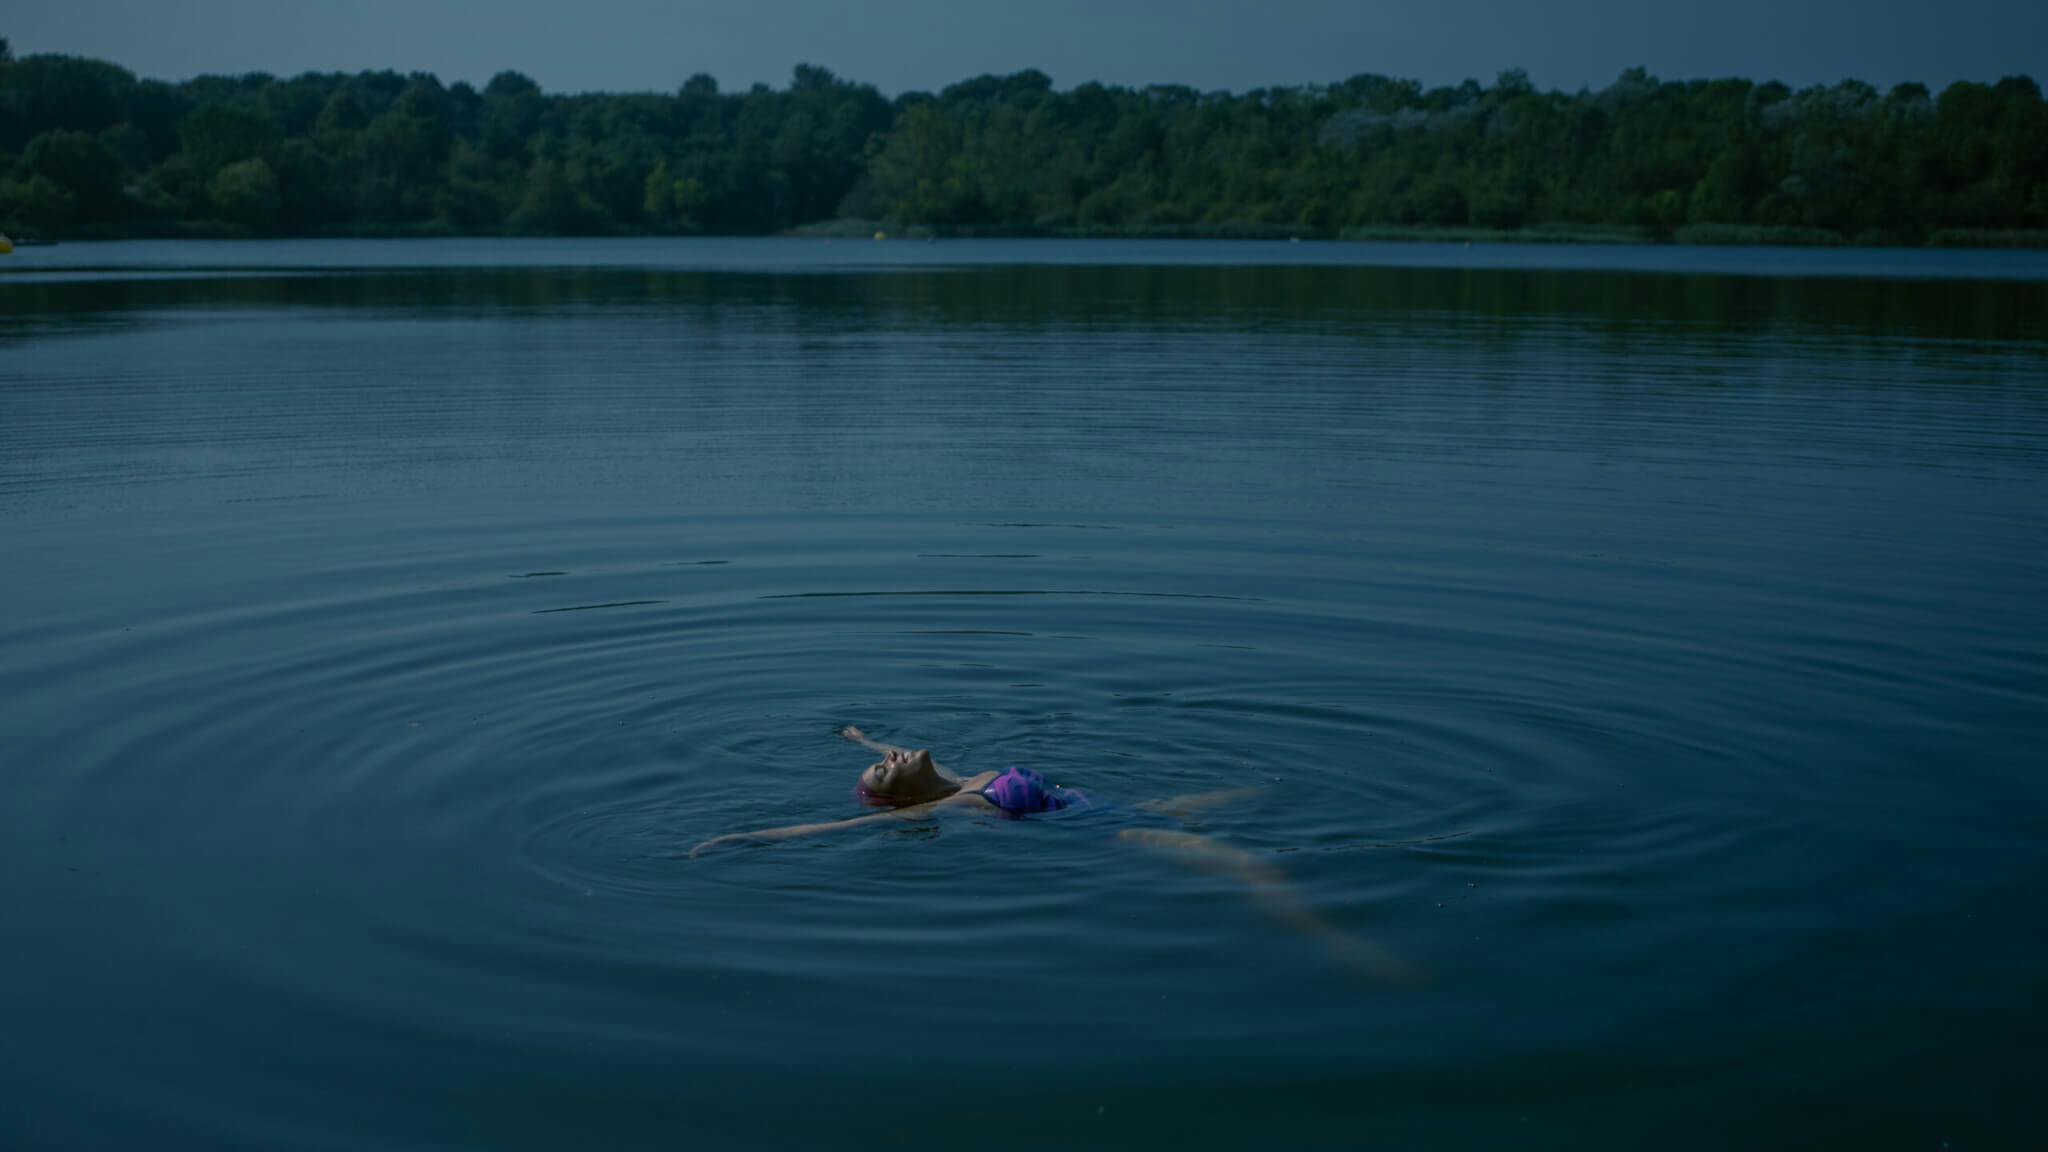 A Black woman floats alone in a deep blue body of water, in a film.